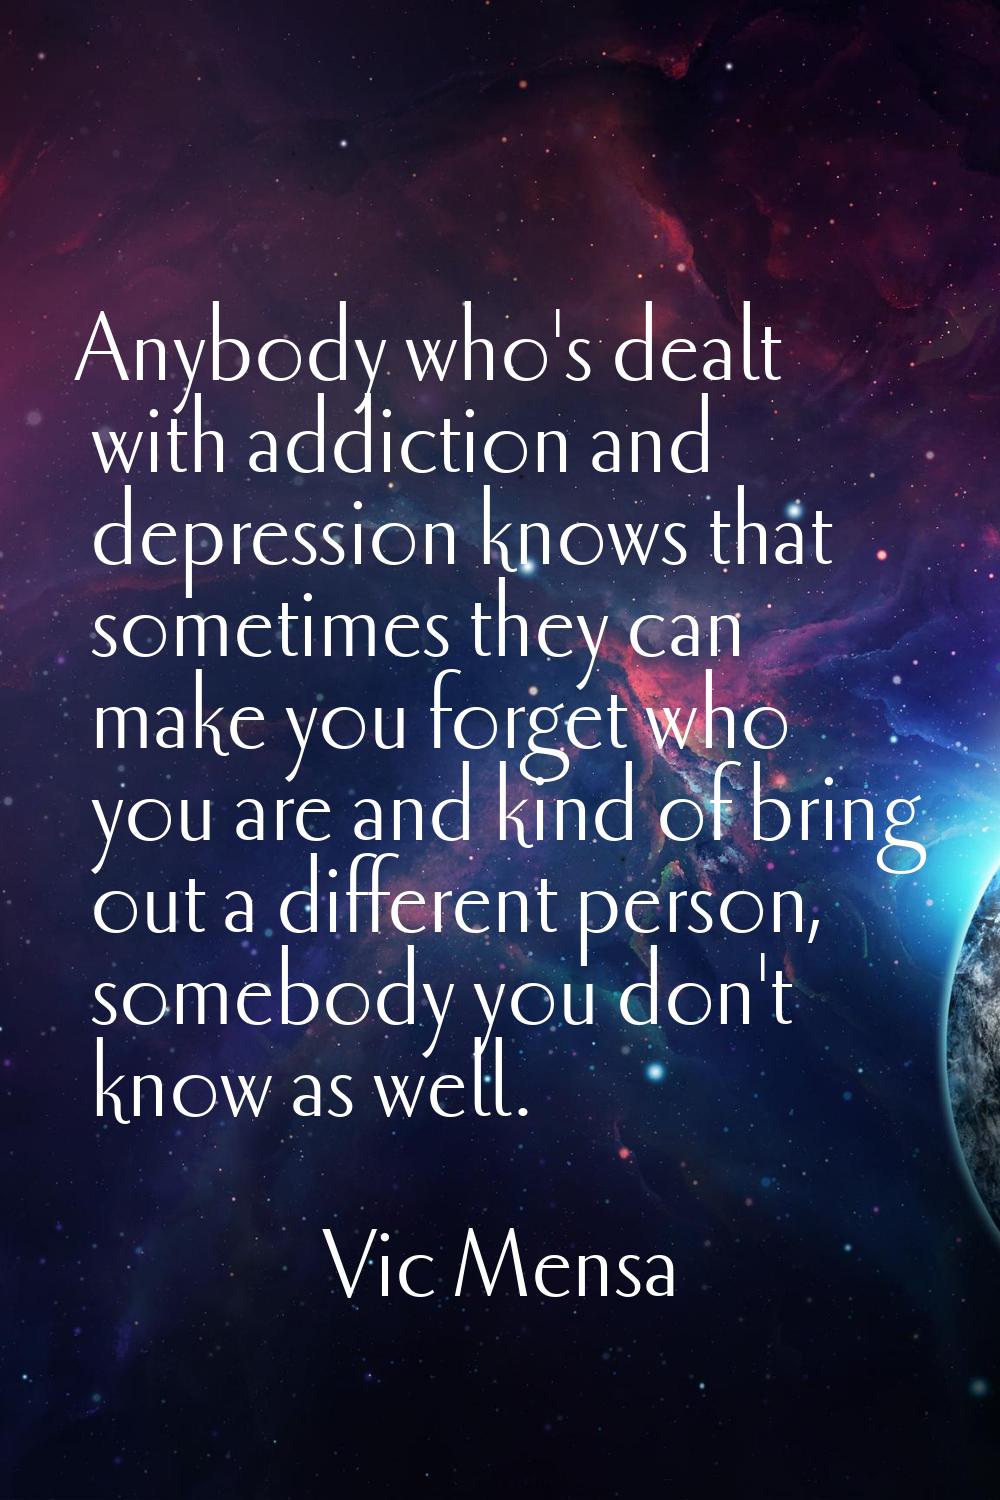 Anybody who's dealt with addiction and depression knows that sometimes they can make you forget who